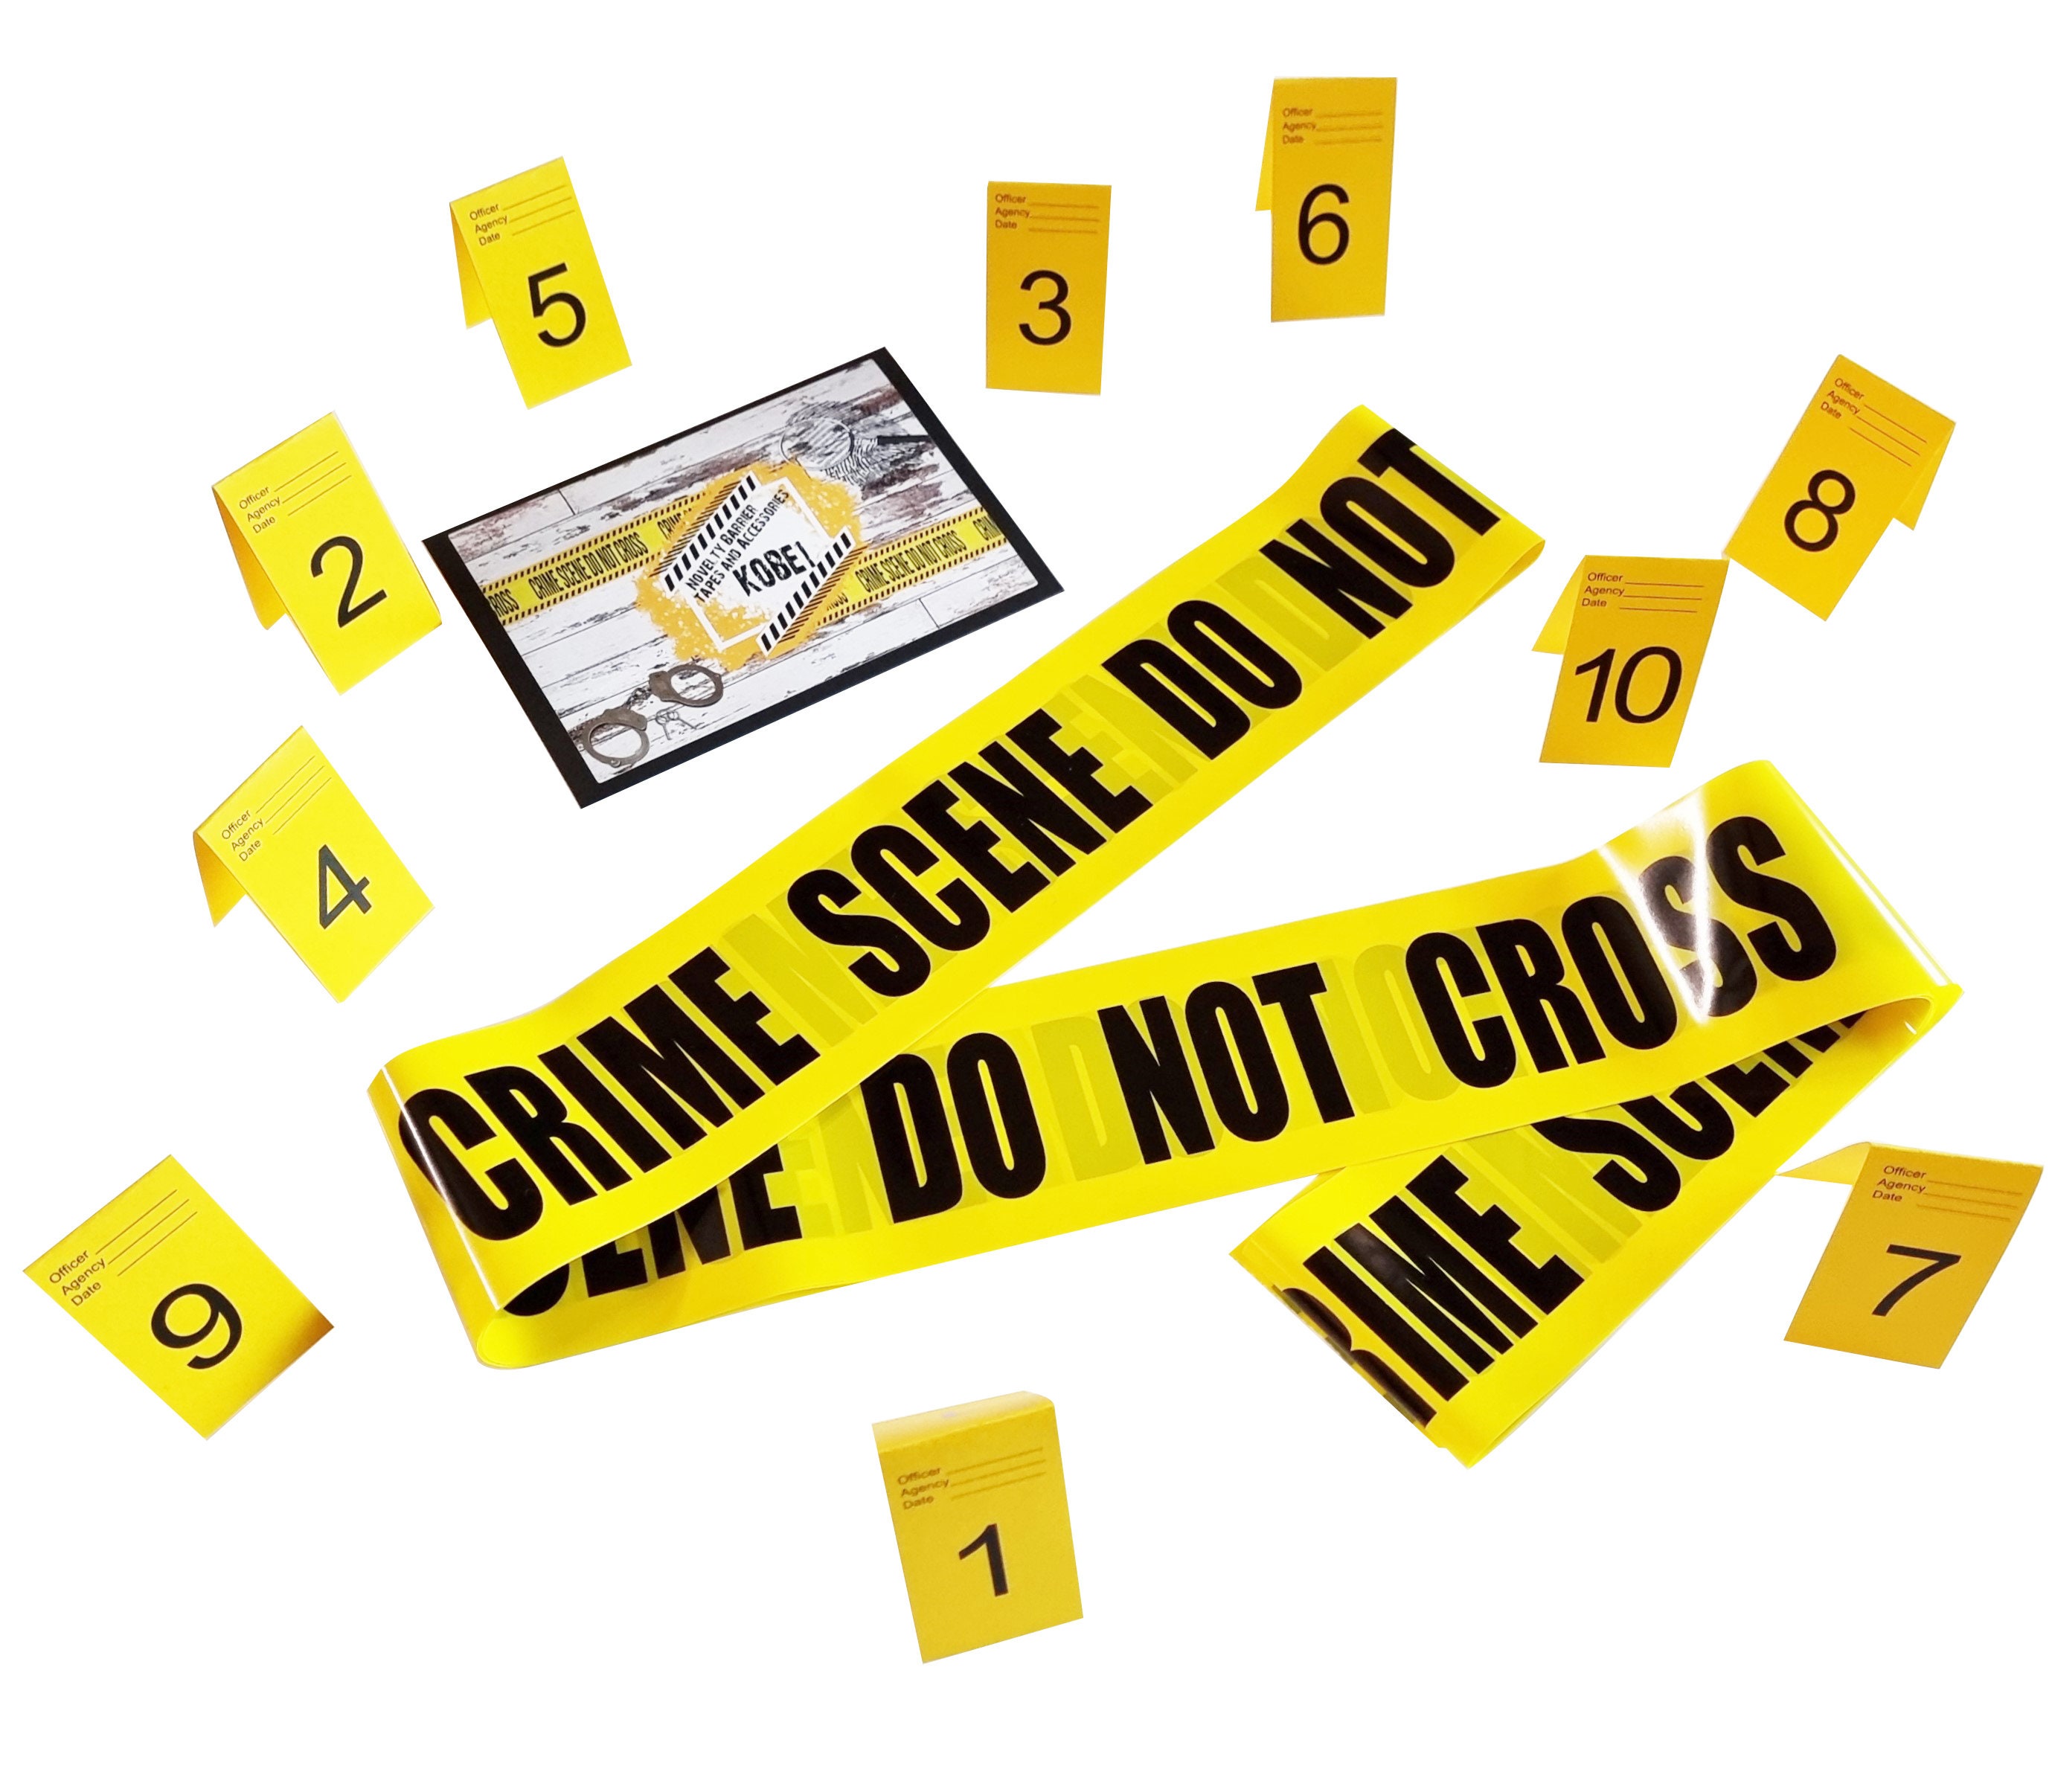 CRIME SCENE DO NOT CROSS Barrier Tape, Forensic Tools & Teaching Supplies:  Educational Innovations, Inc.